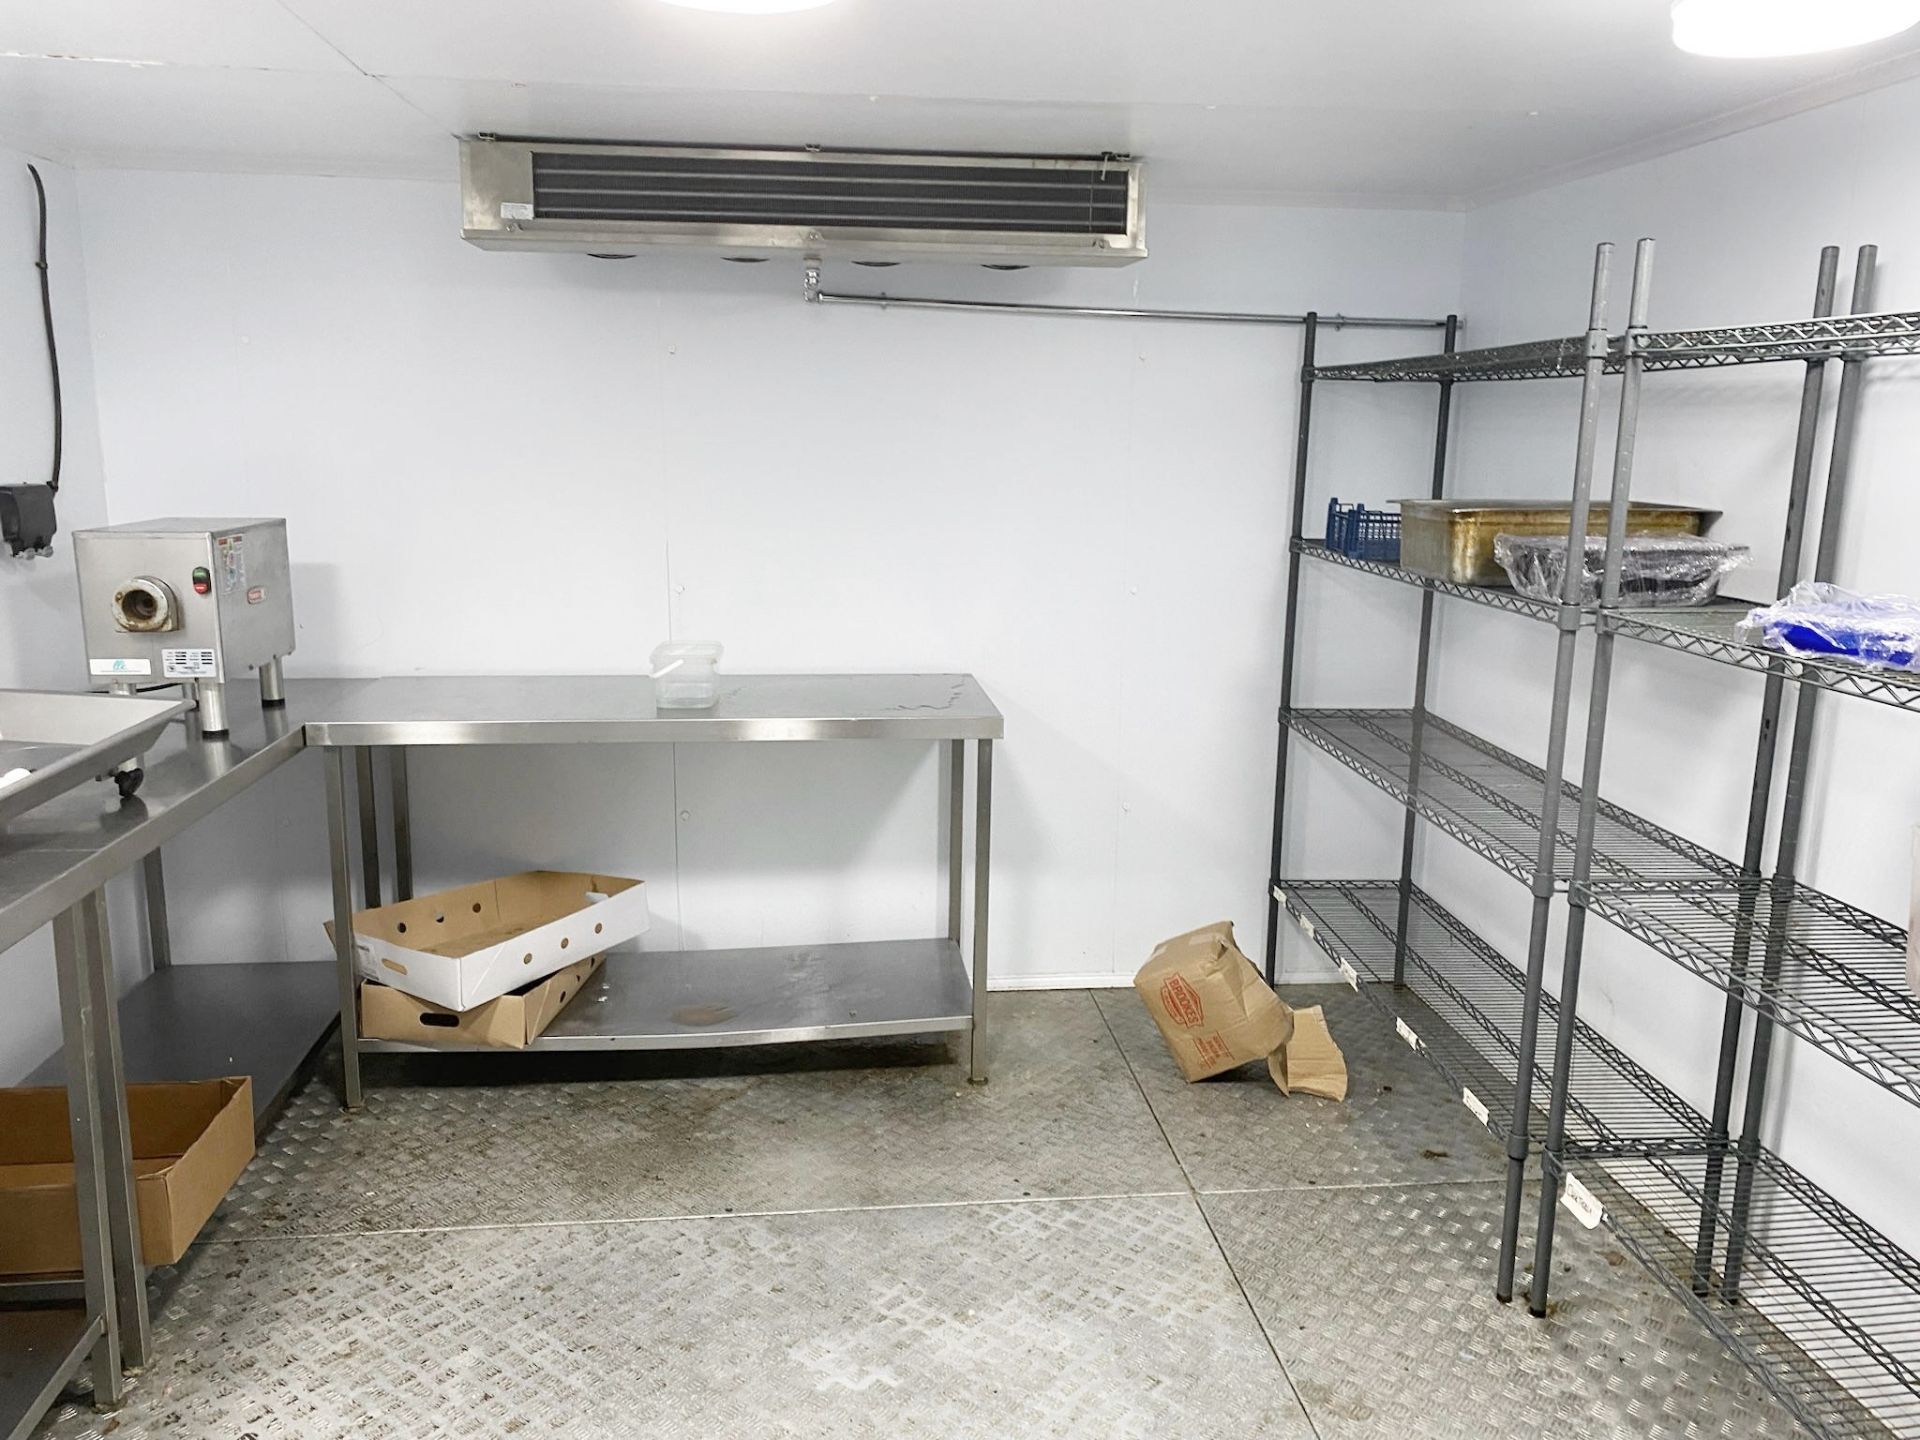 1 x Walk in Refrigeration System Including 2 x Cold Rooms and 1 x Freezer Room - Image 3 of 13